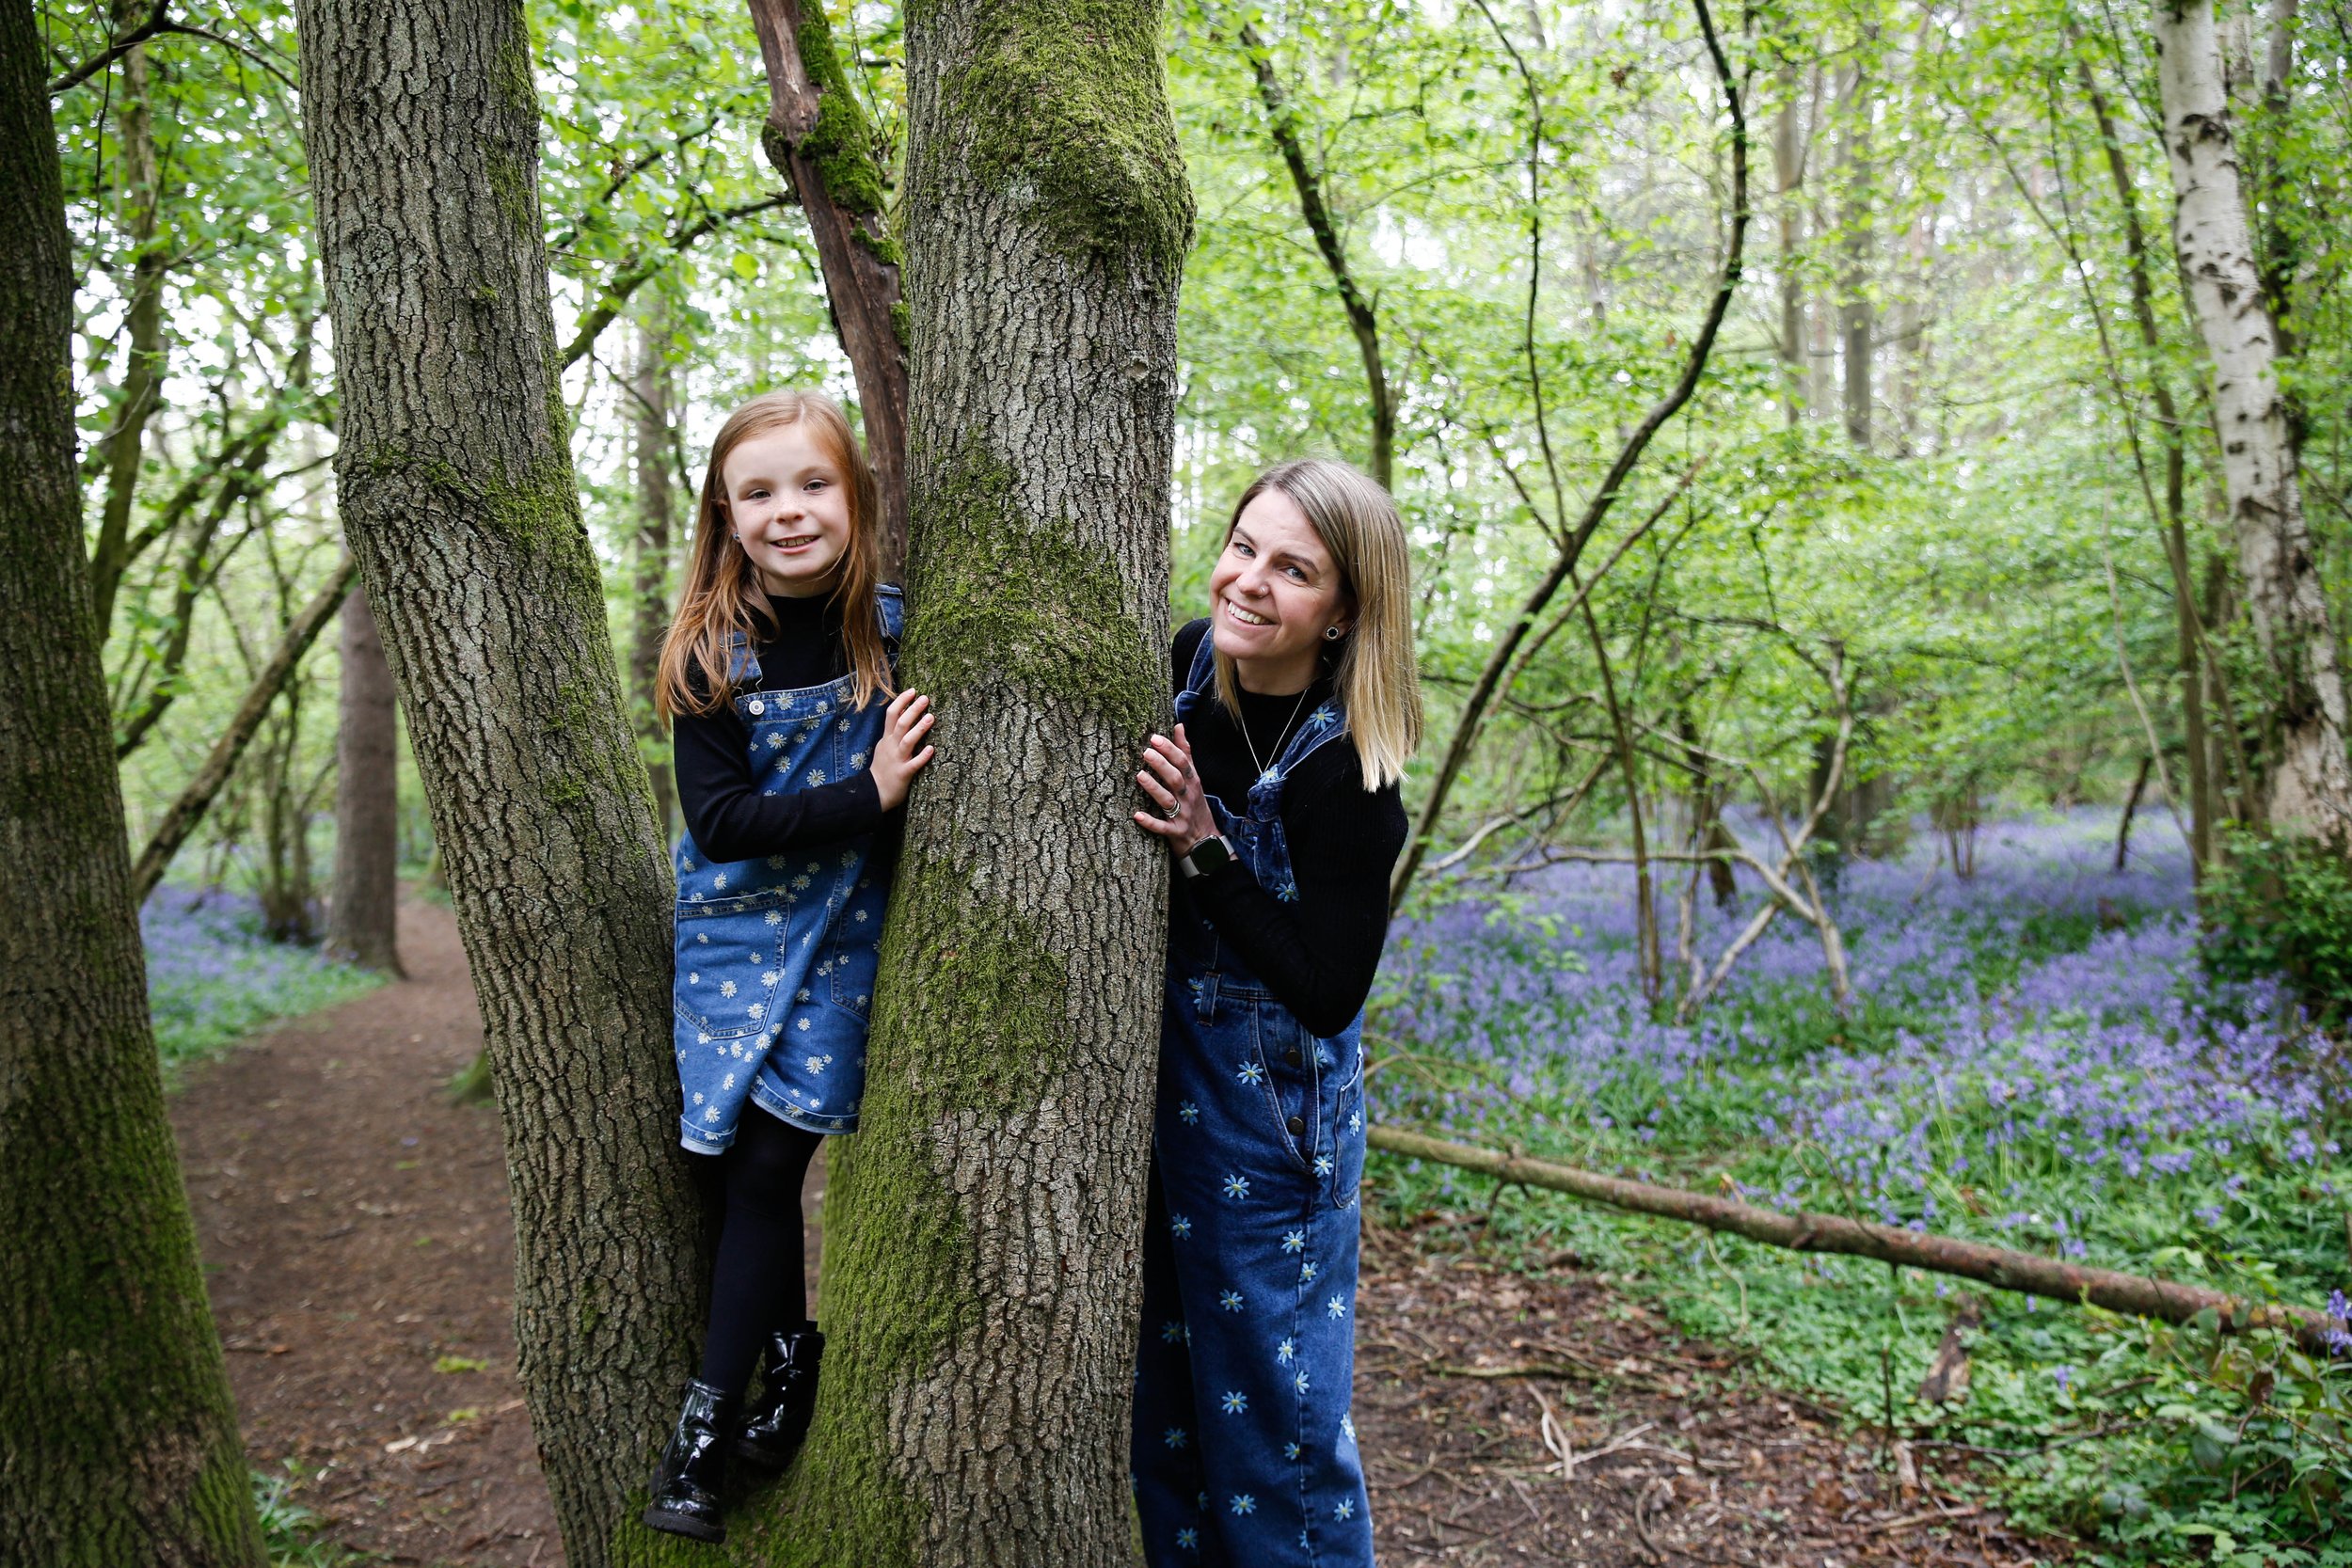 MUM AND DAUGHTER PHOTO SHOOT IN THE BLUEBELLS | BERKSHIRE PORTRAIT SHOOTS13 choice .JPG